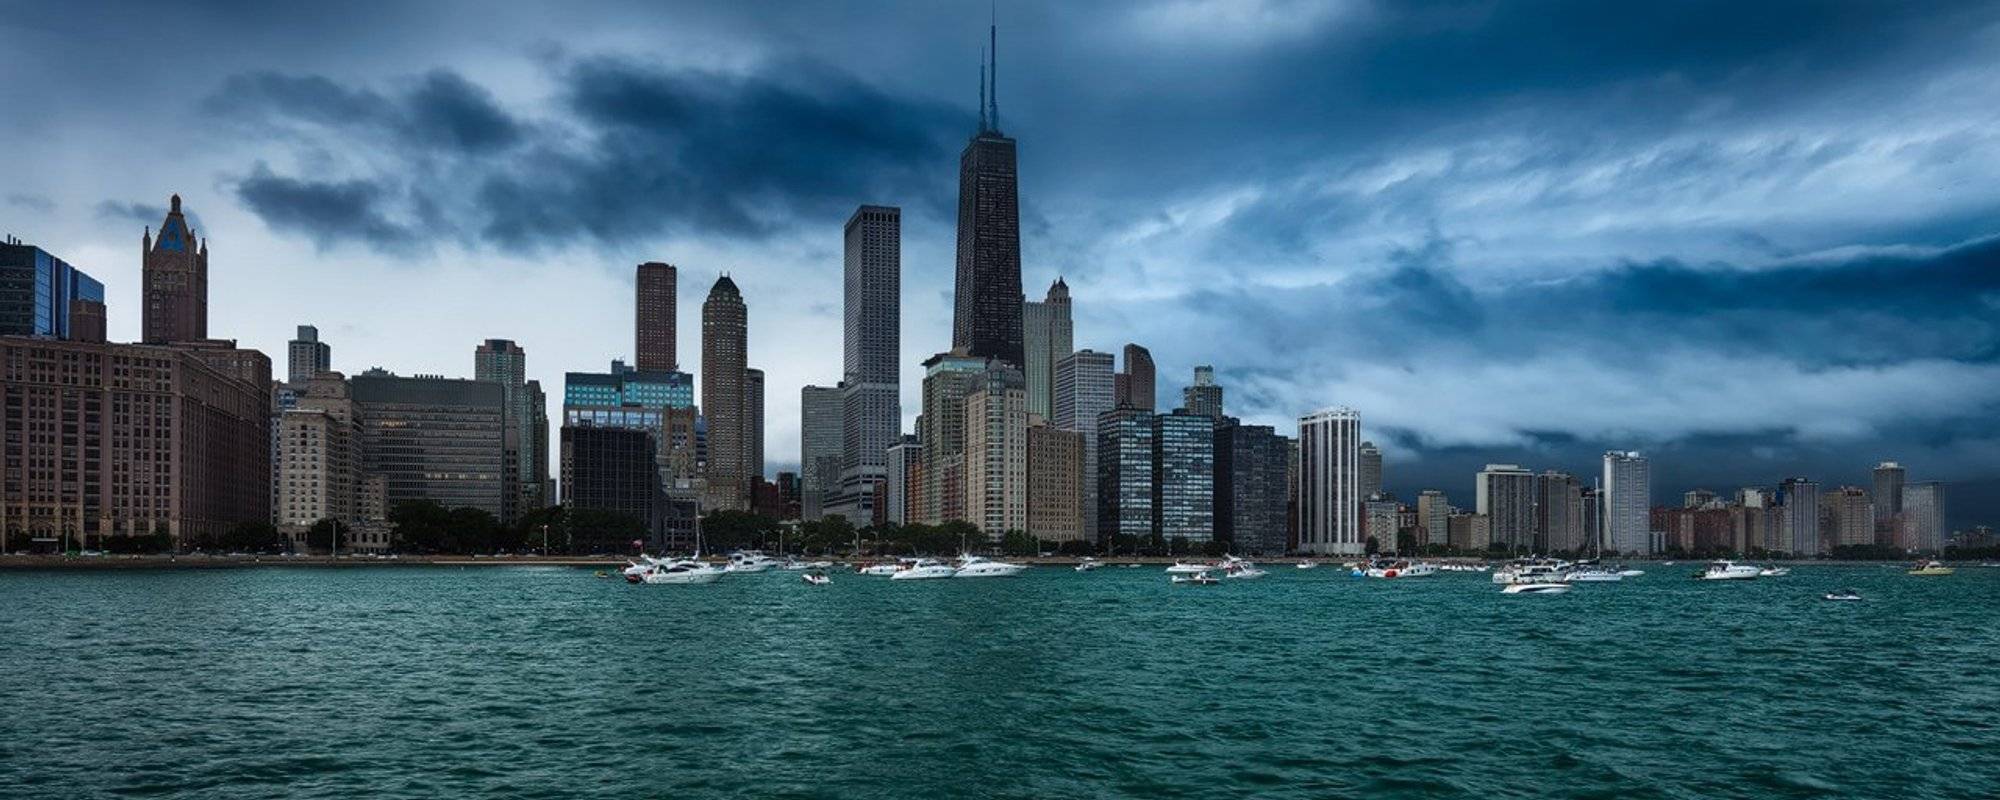 Cityscape Photography in Chicago